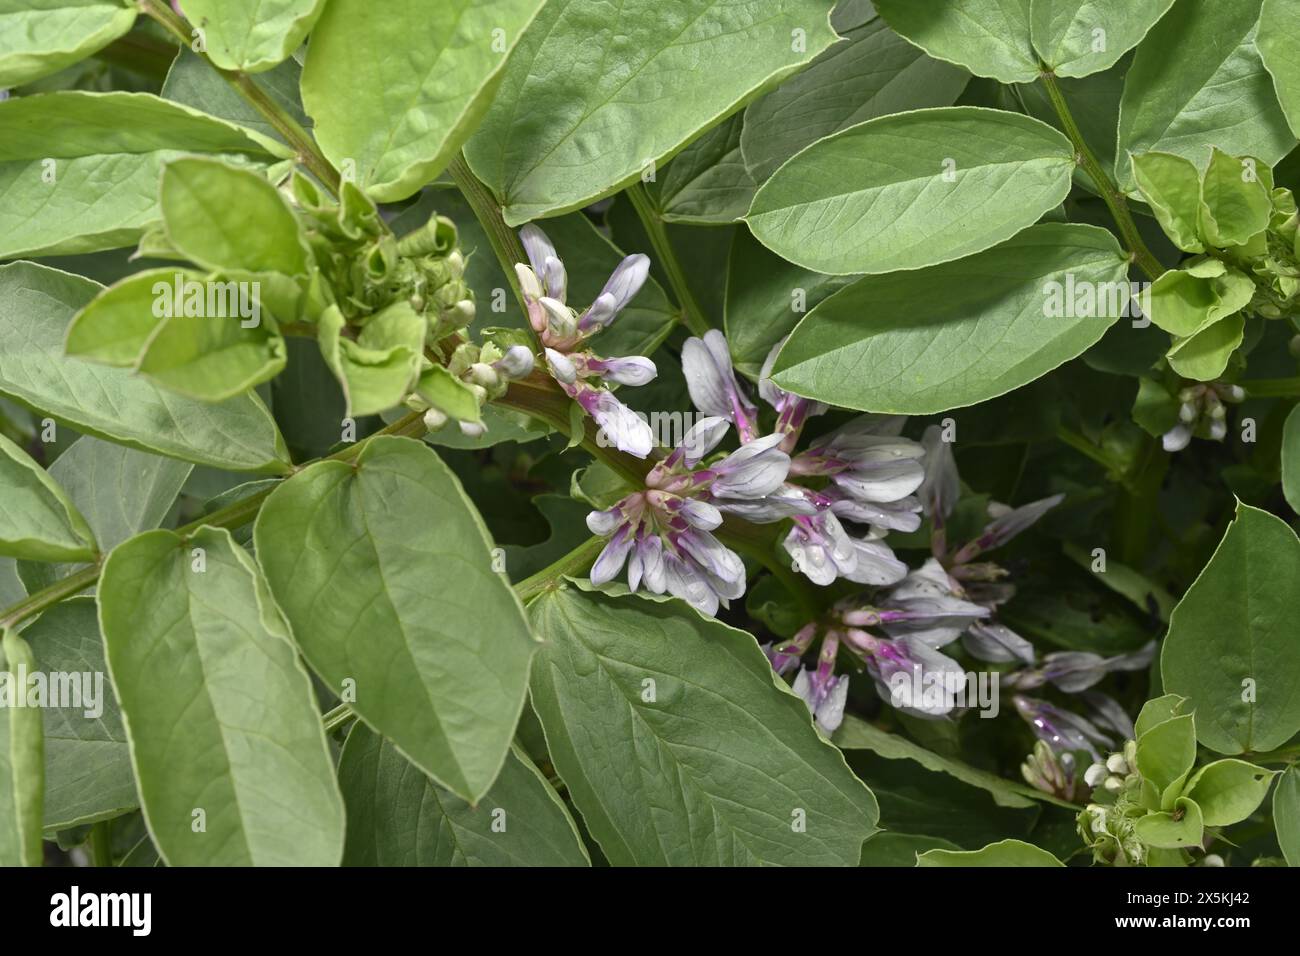 Flowers on fava bean plant growing in garden before beans have started ...